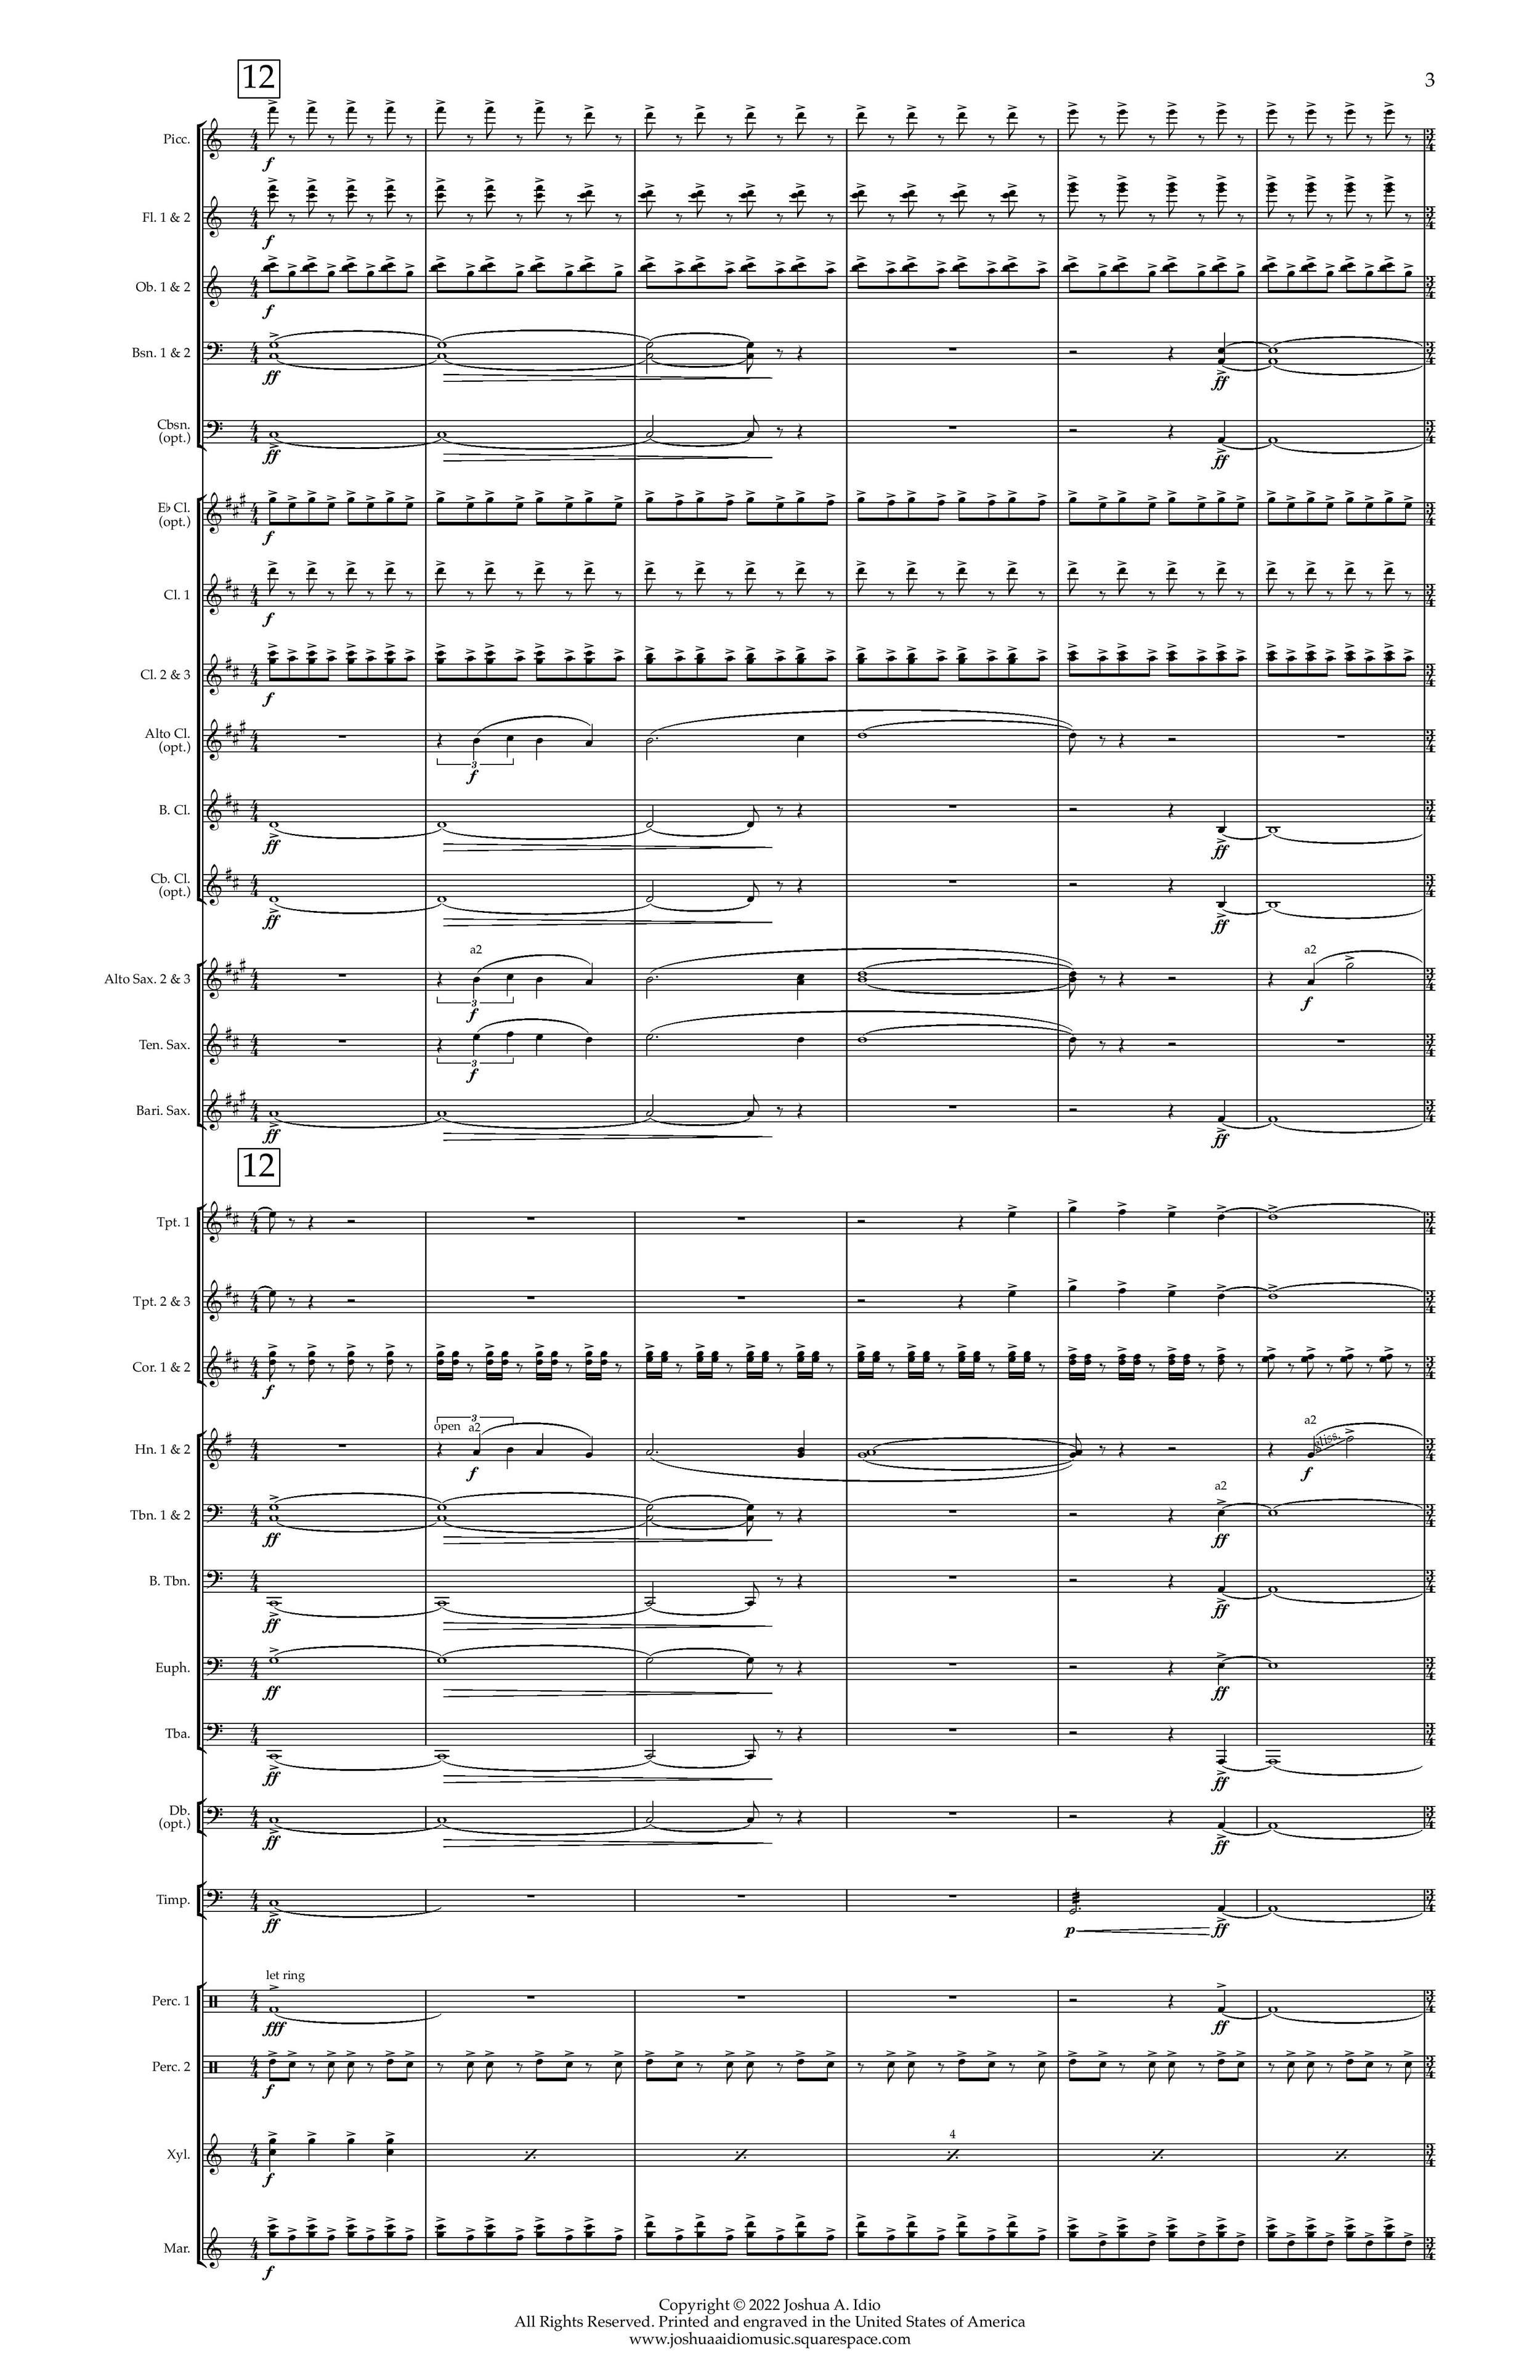 Dreams of an Architect - Conductor s Score-page-003.jpg